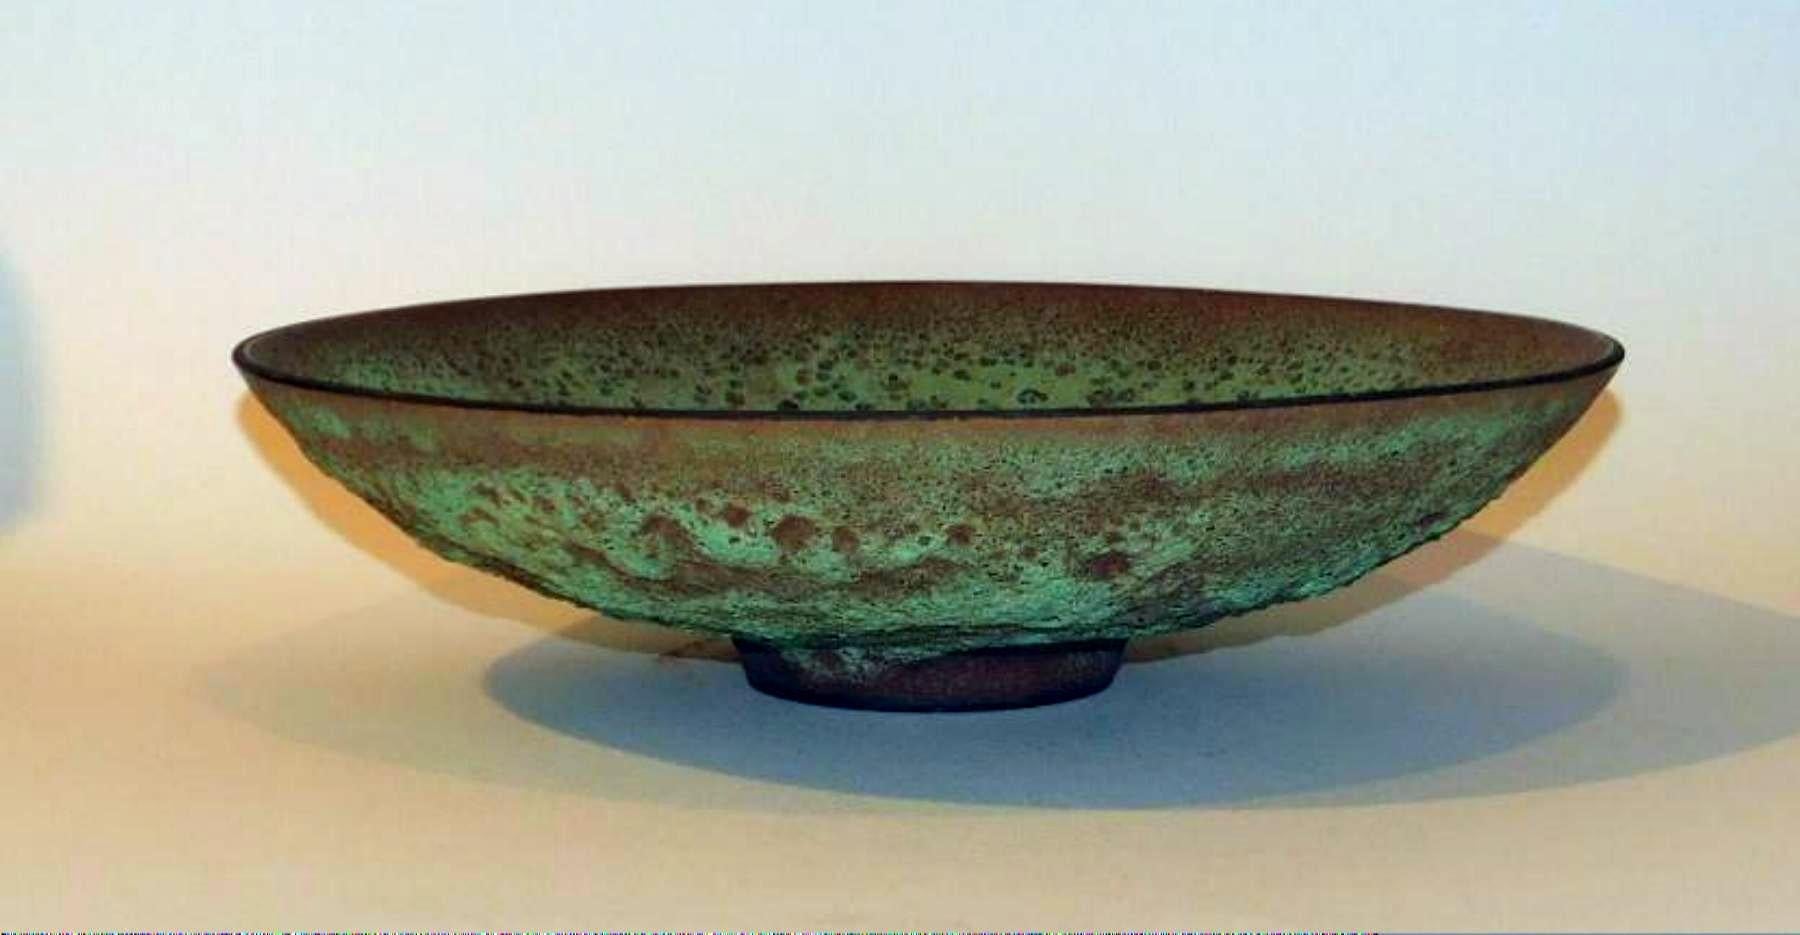 Large footed studio bowl by well-known California potter James Lovera (1920-2015).
Perfect for a centerpiece bowl in a modern home.
Measures 3 1/2